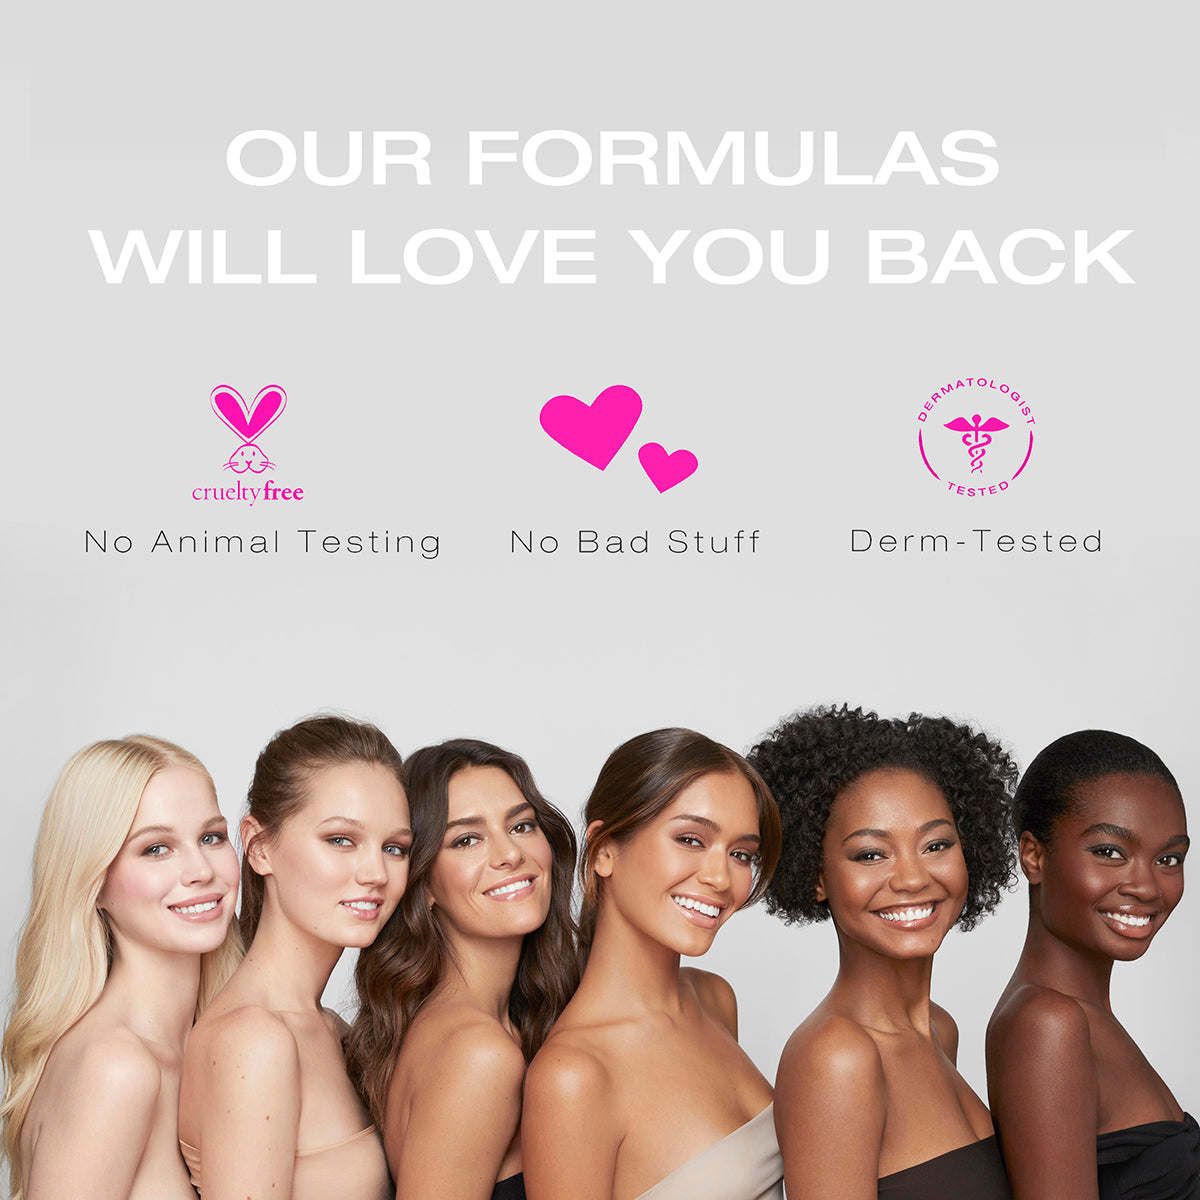 Models wearing makeup from the fold out face palette with text describing the product as having no animal testing, no bad stuff, and dermatologist tested. 